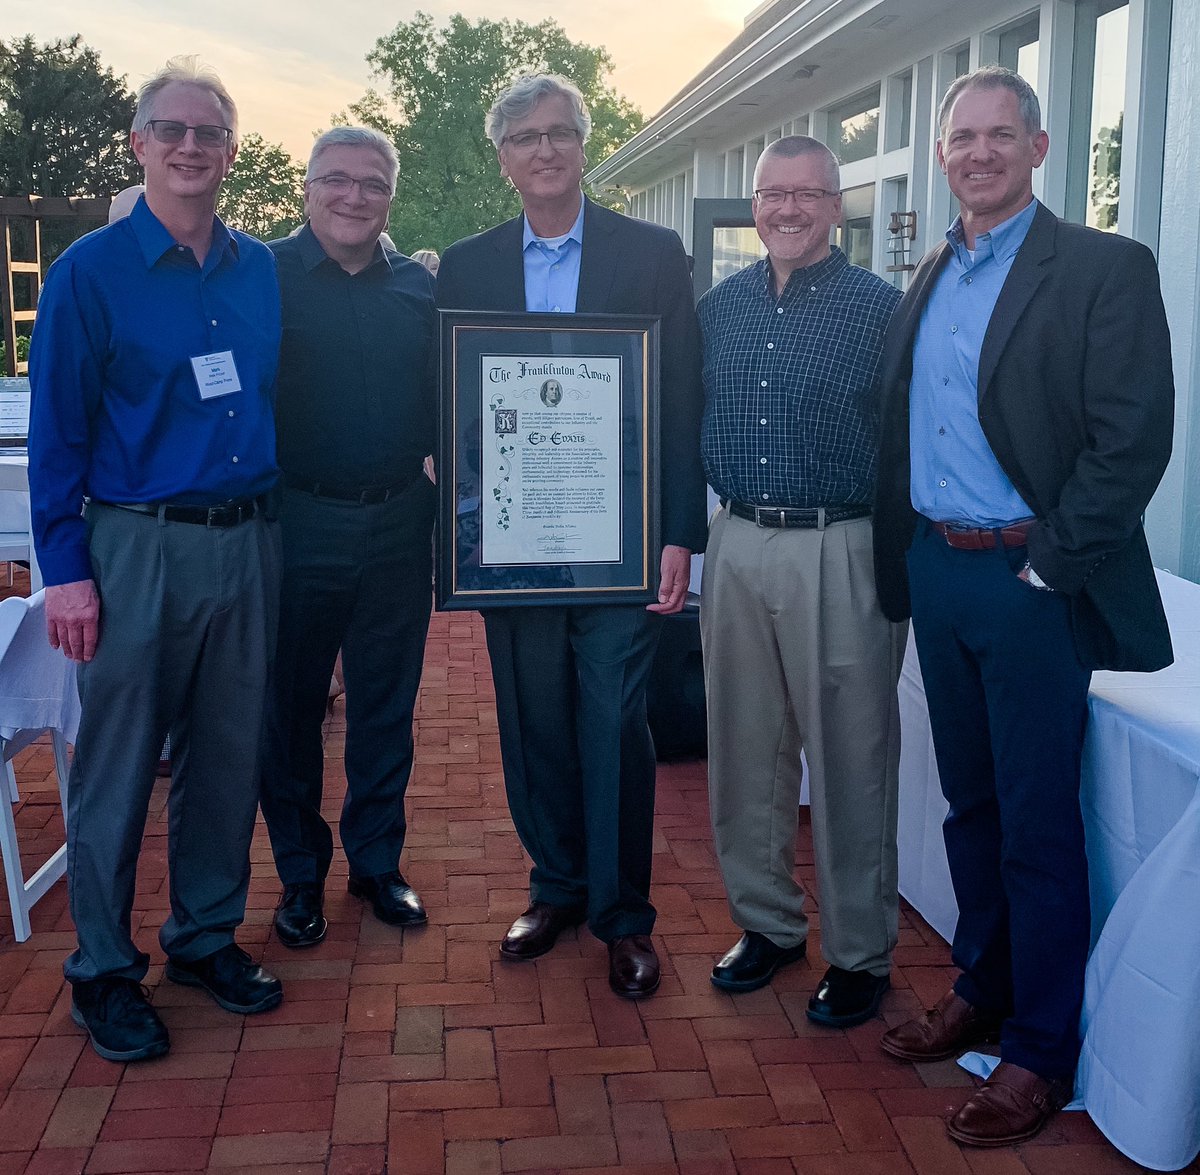 So proud of Ed Evans for being honored the Franklinton Award at last week's @printOHKY Central Region Print Excellence Awards! We thank Ed for all he's done for #WestCamp and the #printindustry in his 30 years career.